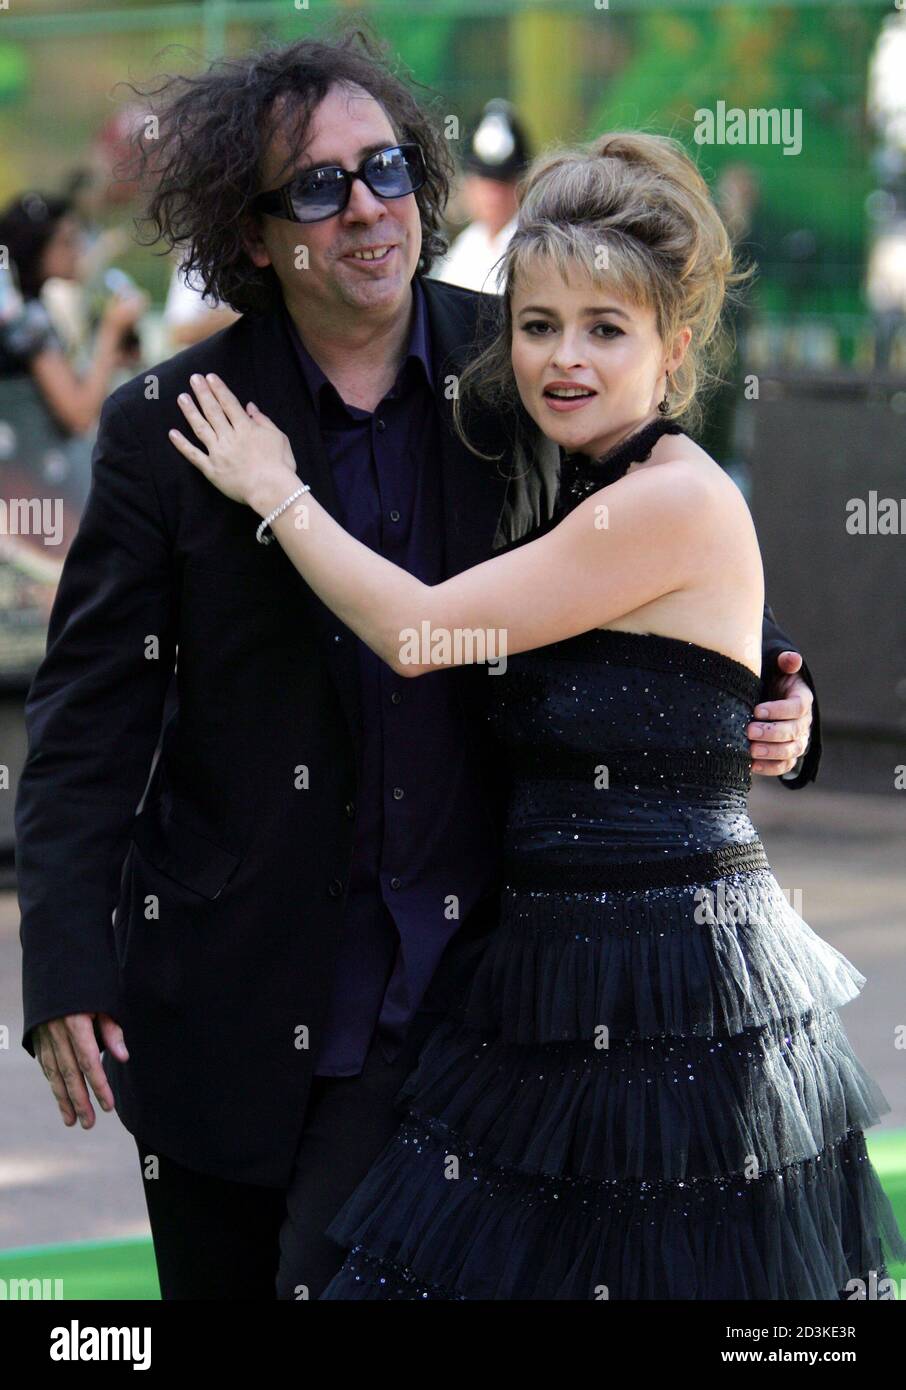 British actress Bonham-Carter and director Burton arrive for the premiere  of "Charlie and the Chocolate Factory" in Leicester Square, London. British  actress Helena Bonham-Carter (R) and director Tim Burton arrive for the